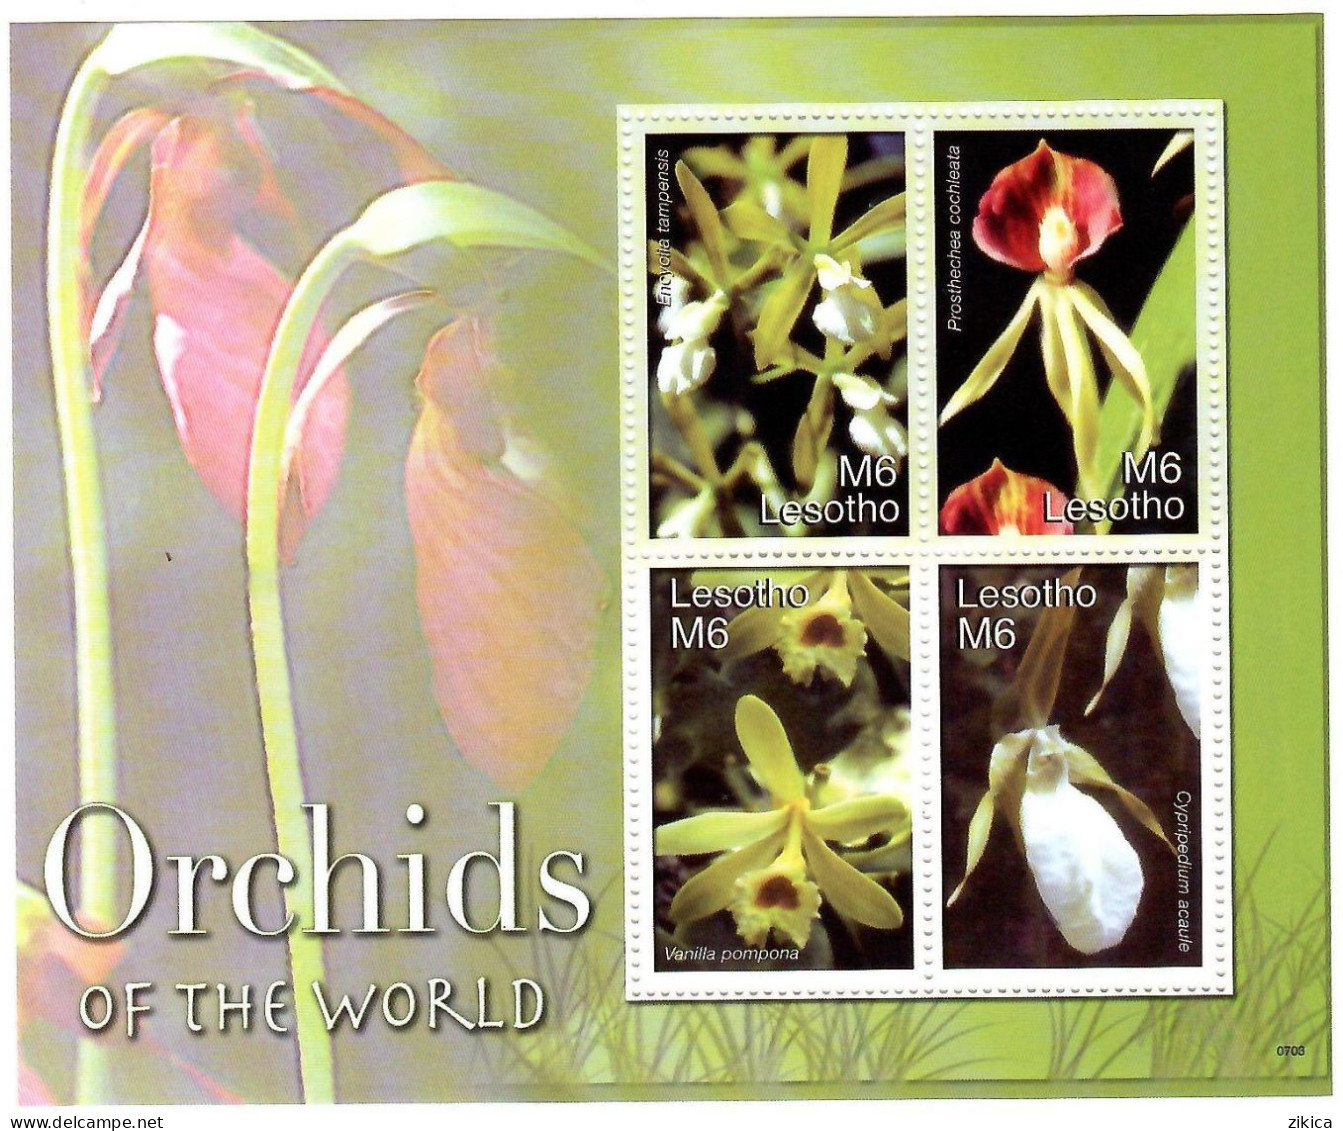 Lesotho - 2007 Flowers - Orchids .S/S  MNH** - Lesotho (1966-...)